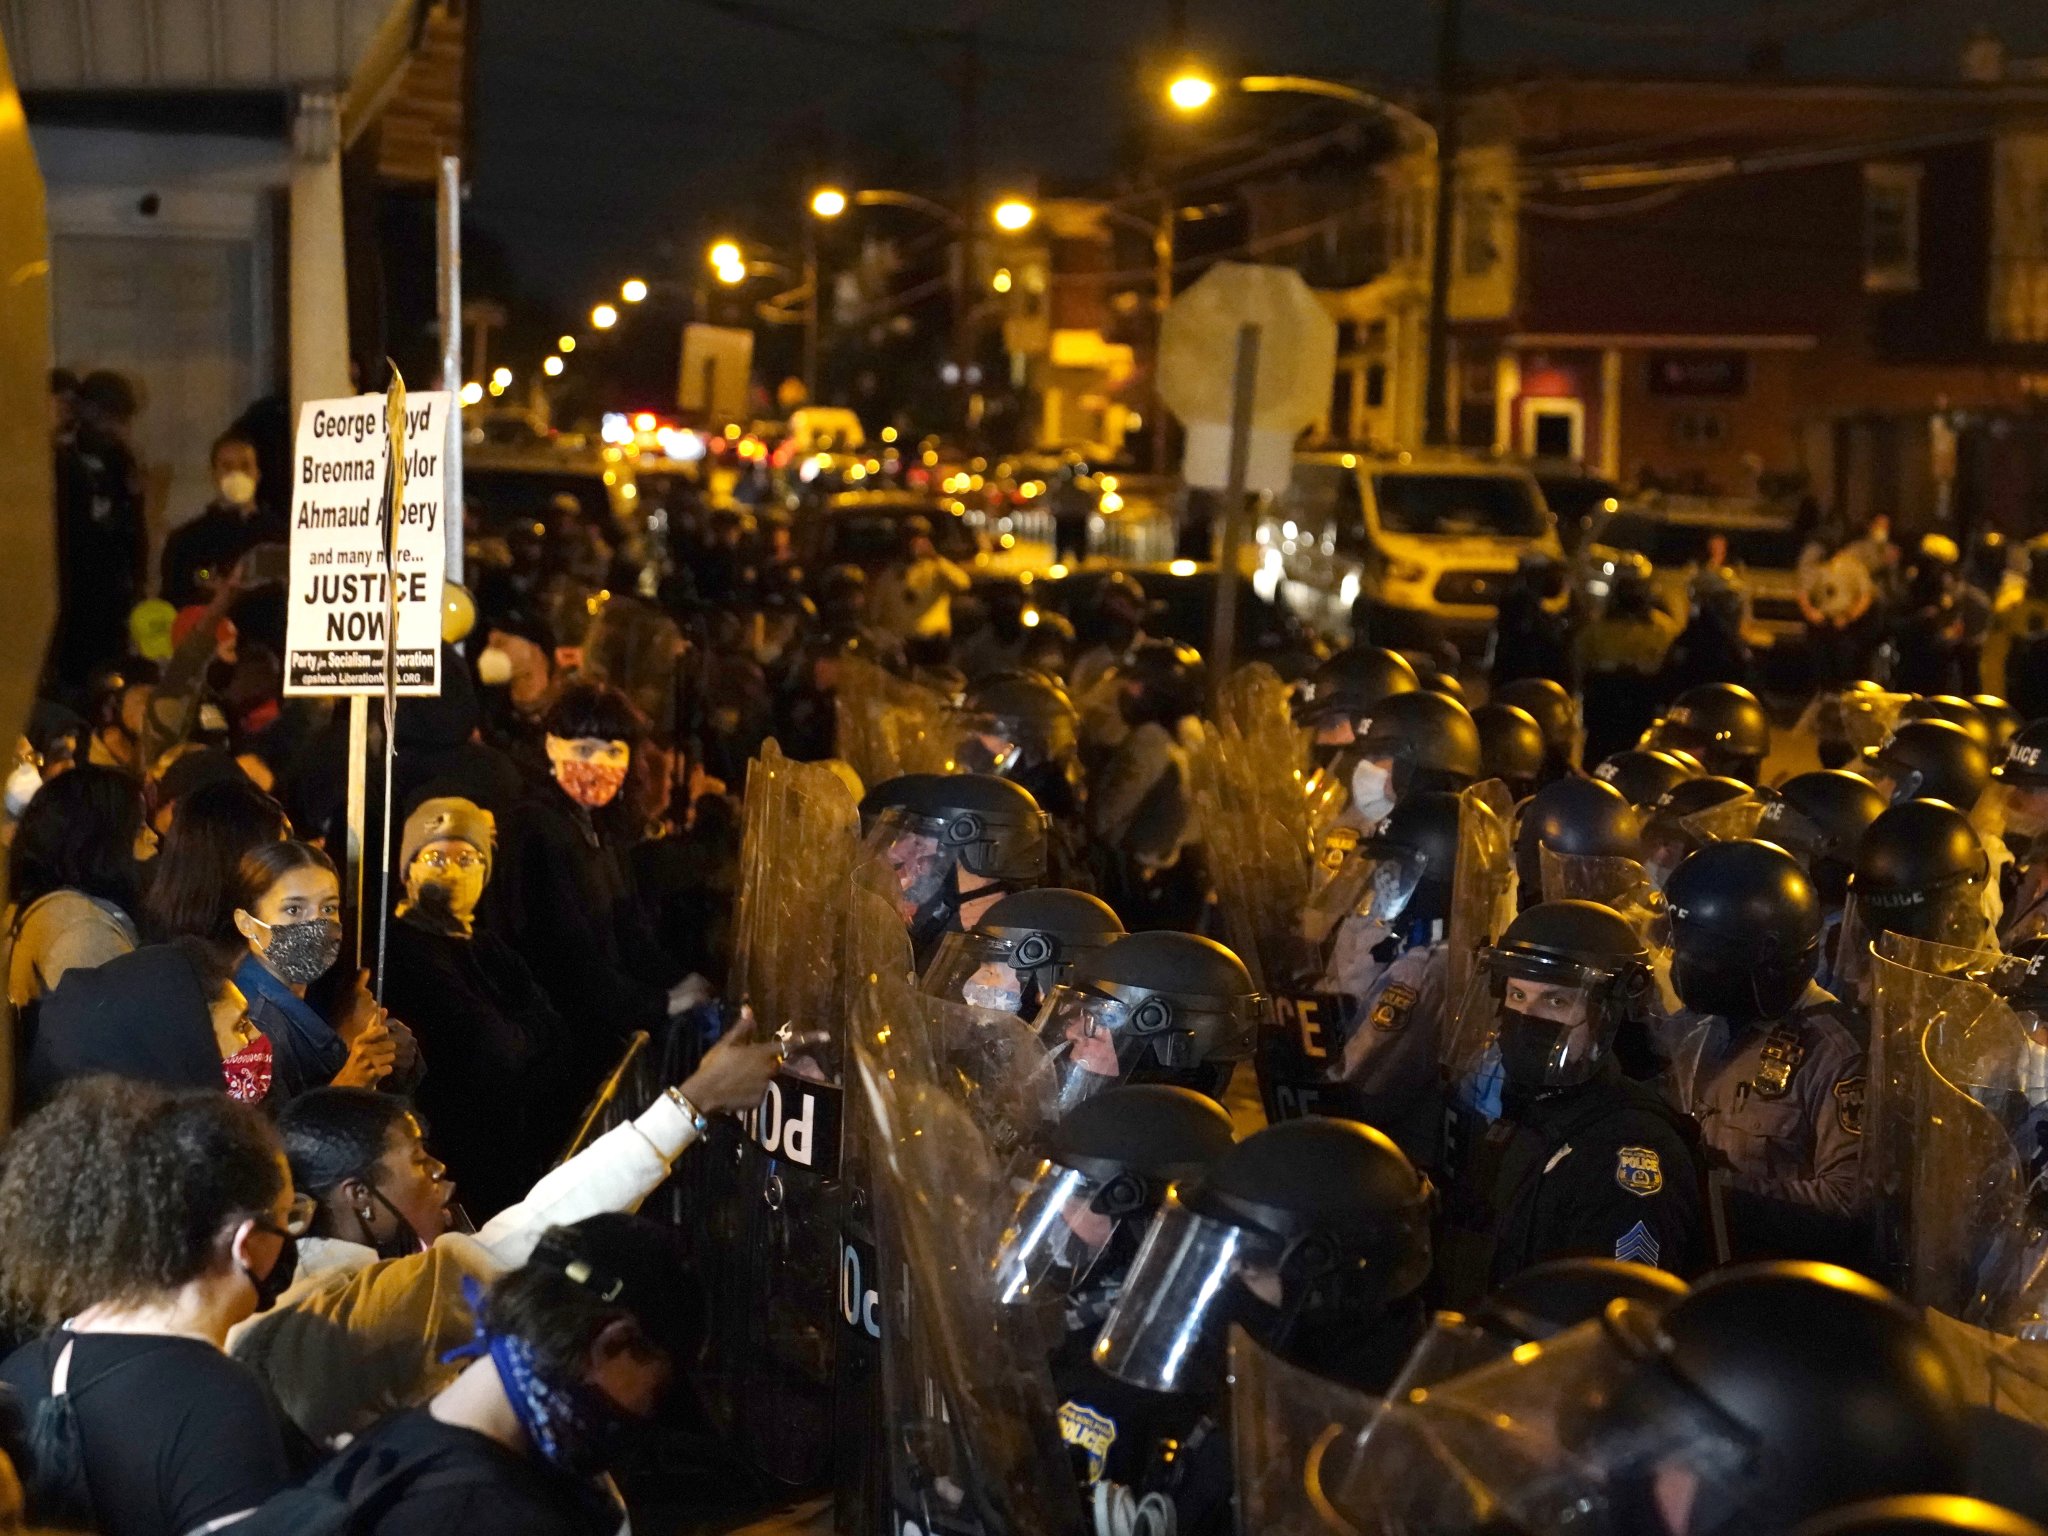 Curfew In Philadelphia Lifts As City Is Roiled By Protests In Walter Wallace Shooting